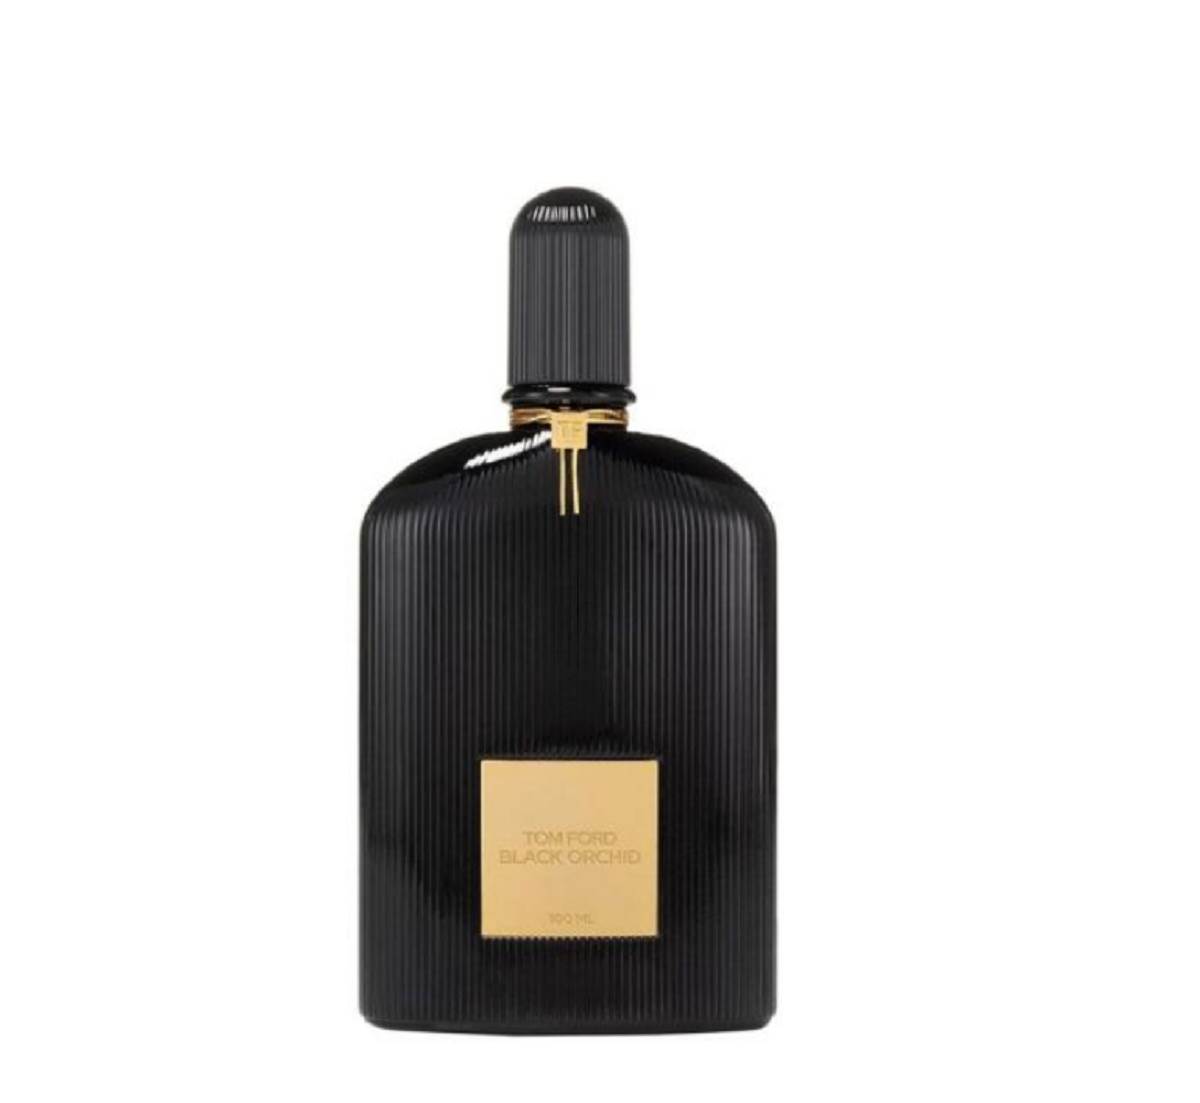  Tom Ford - Black Orchid 